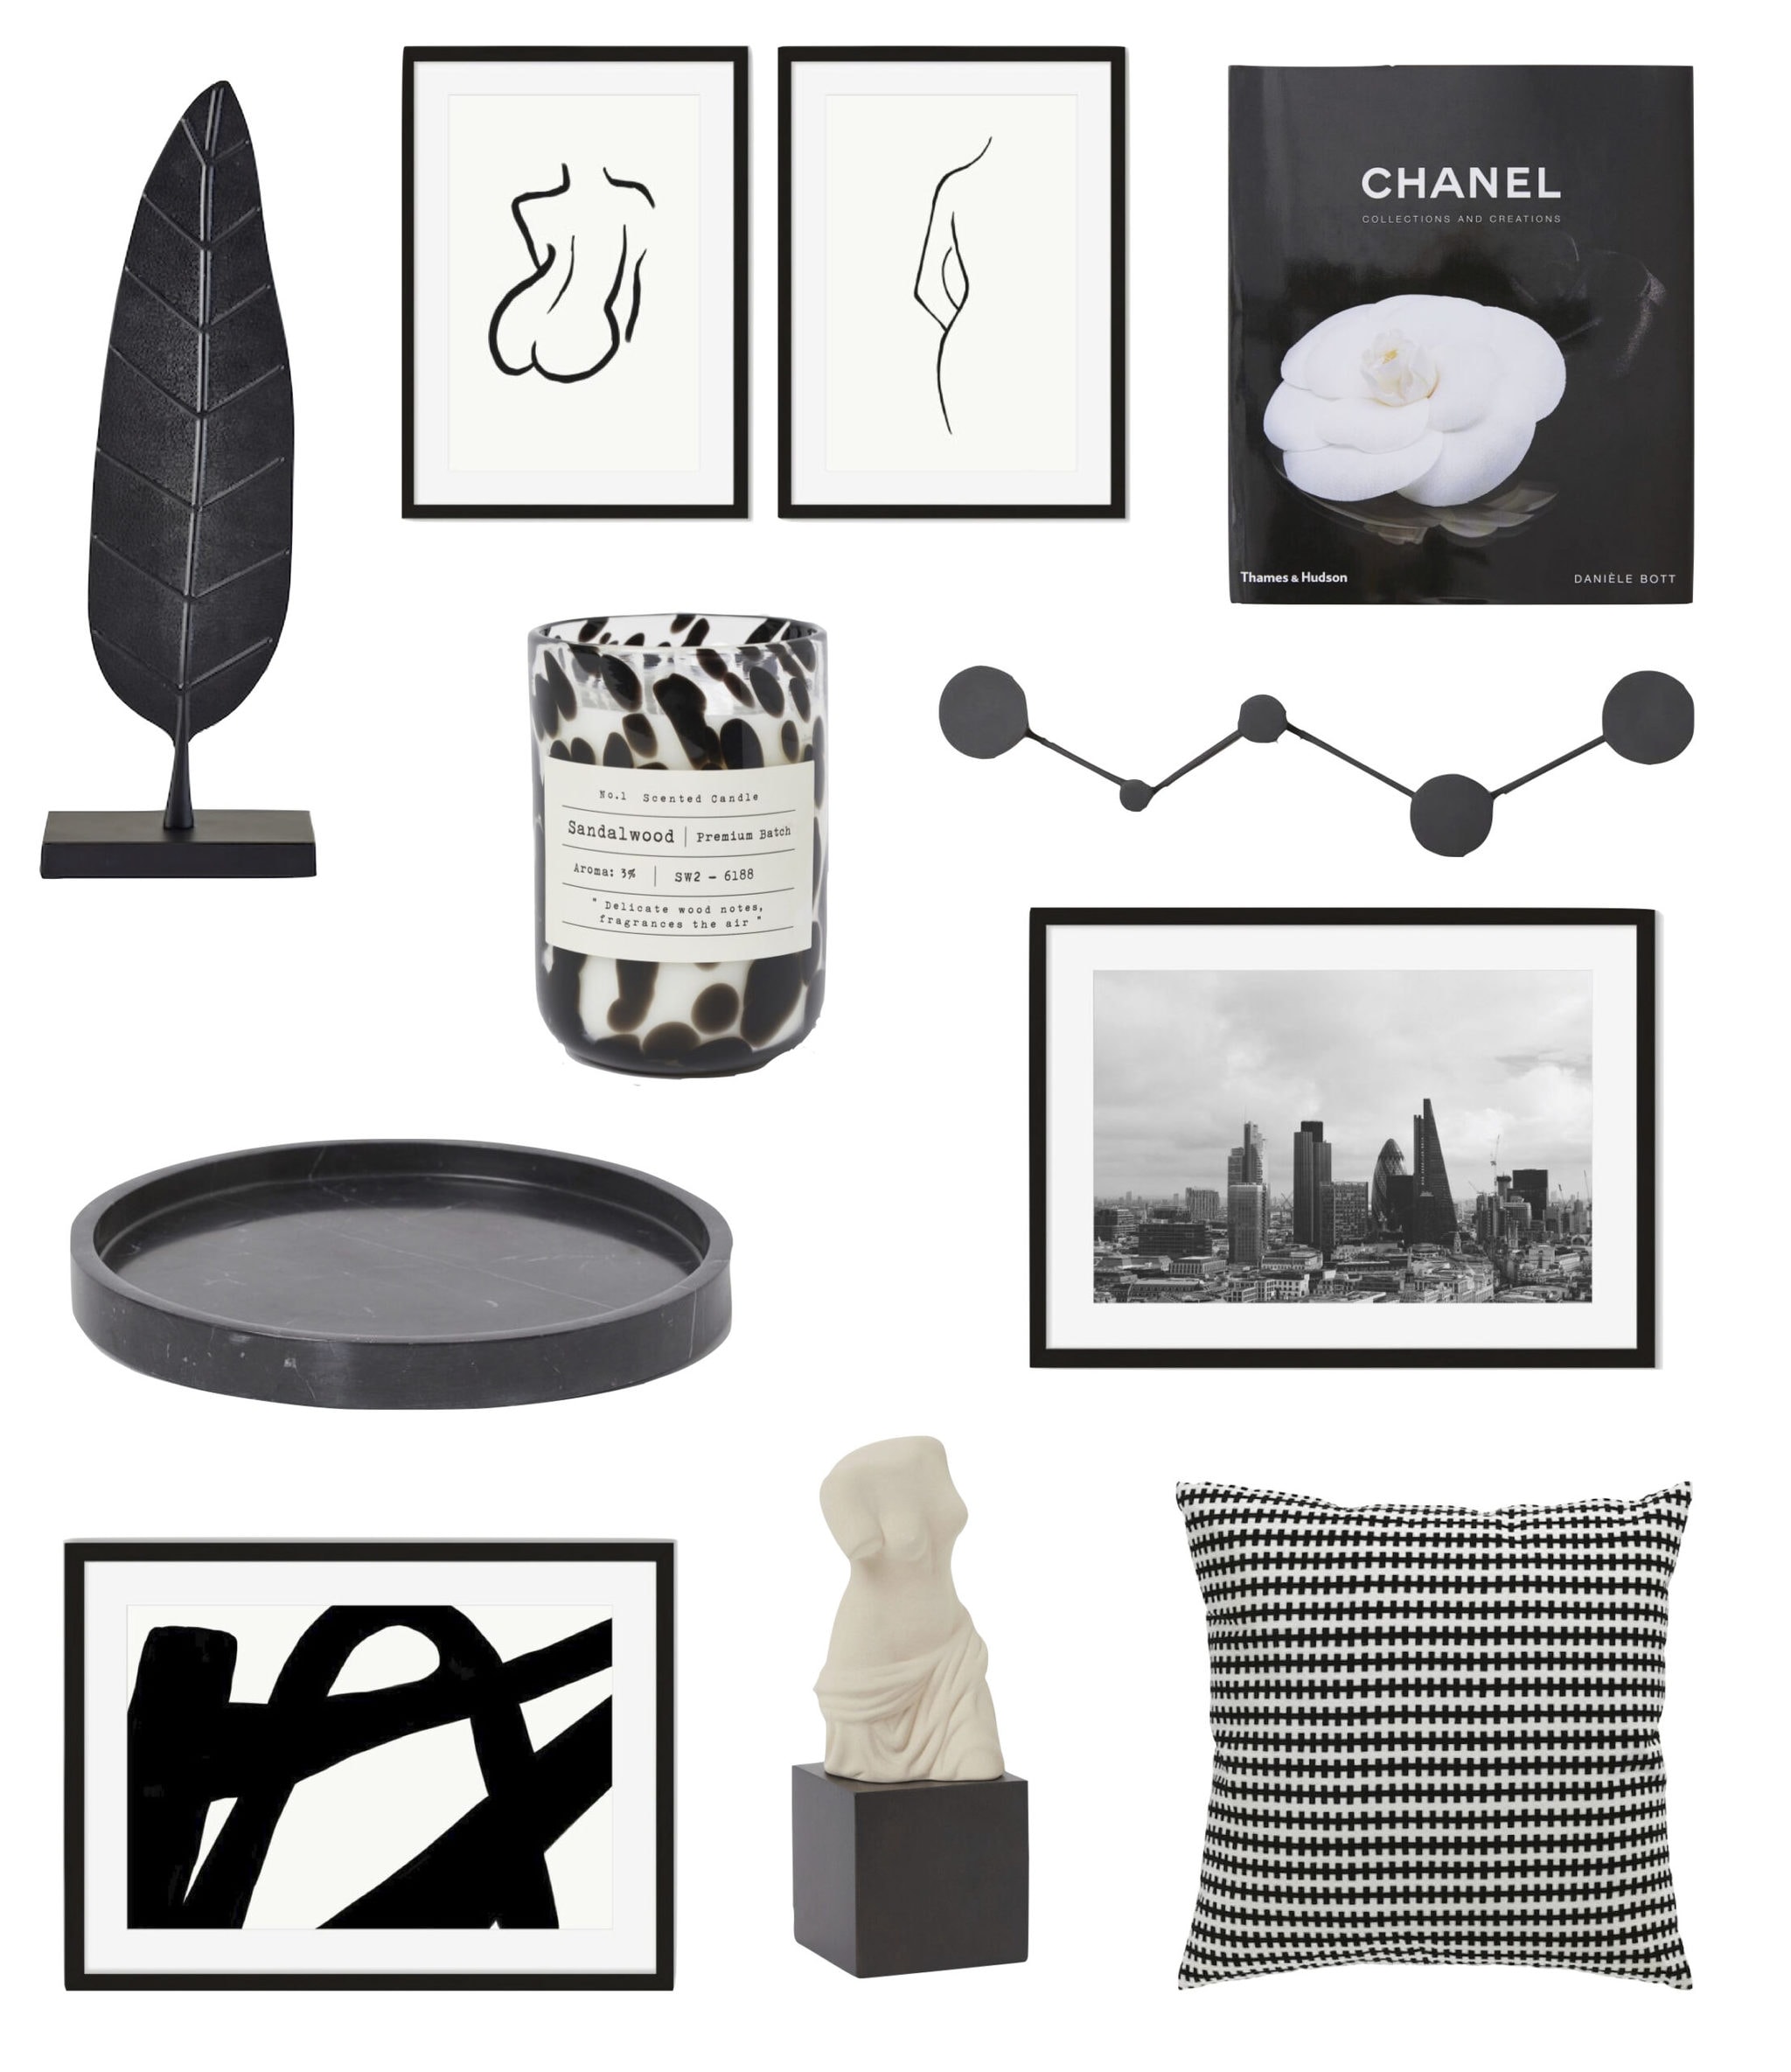 How To Take Advantage of Black Home Accessories